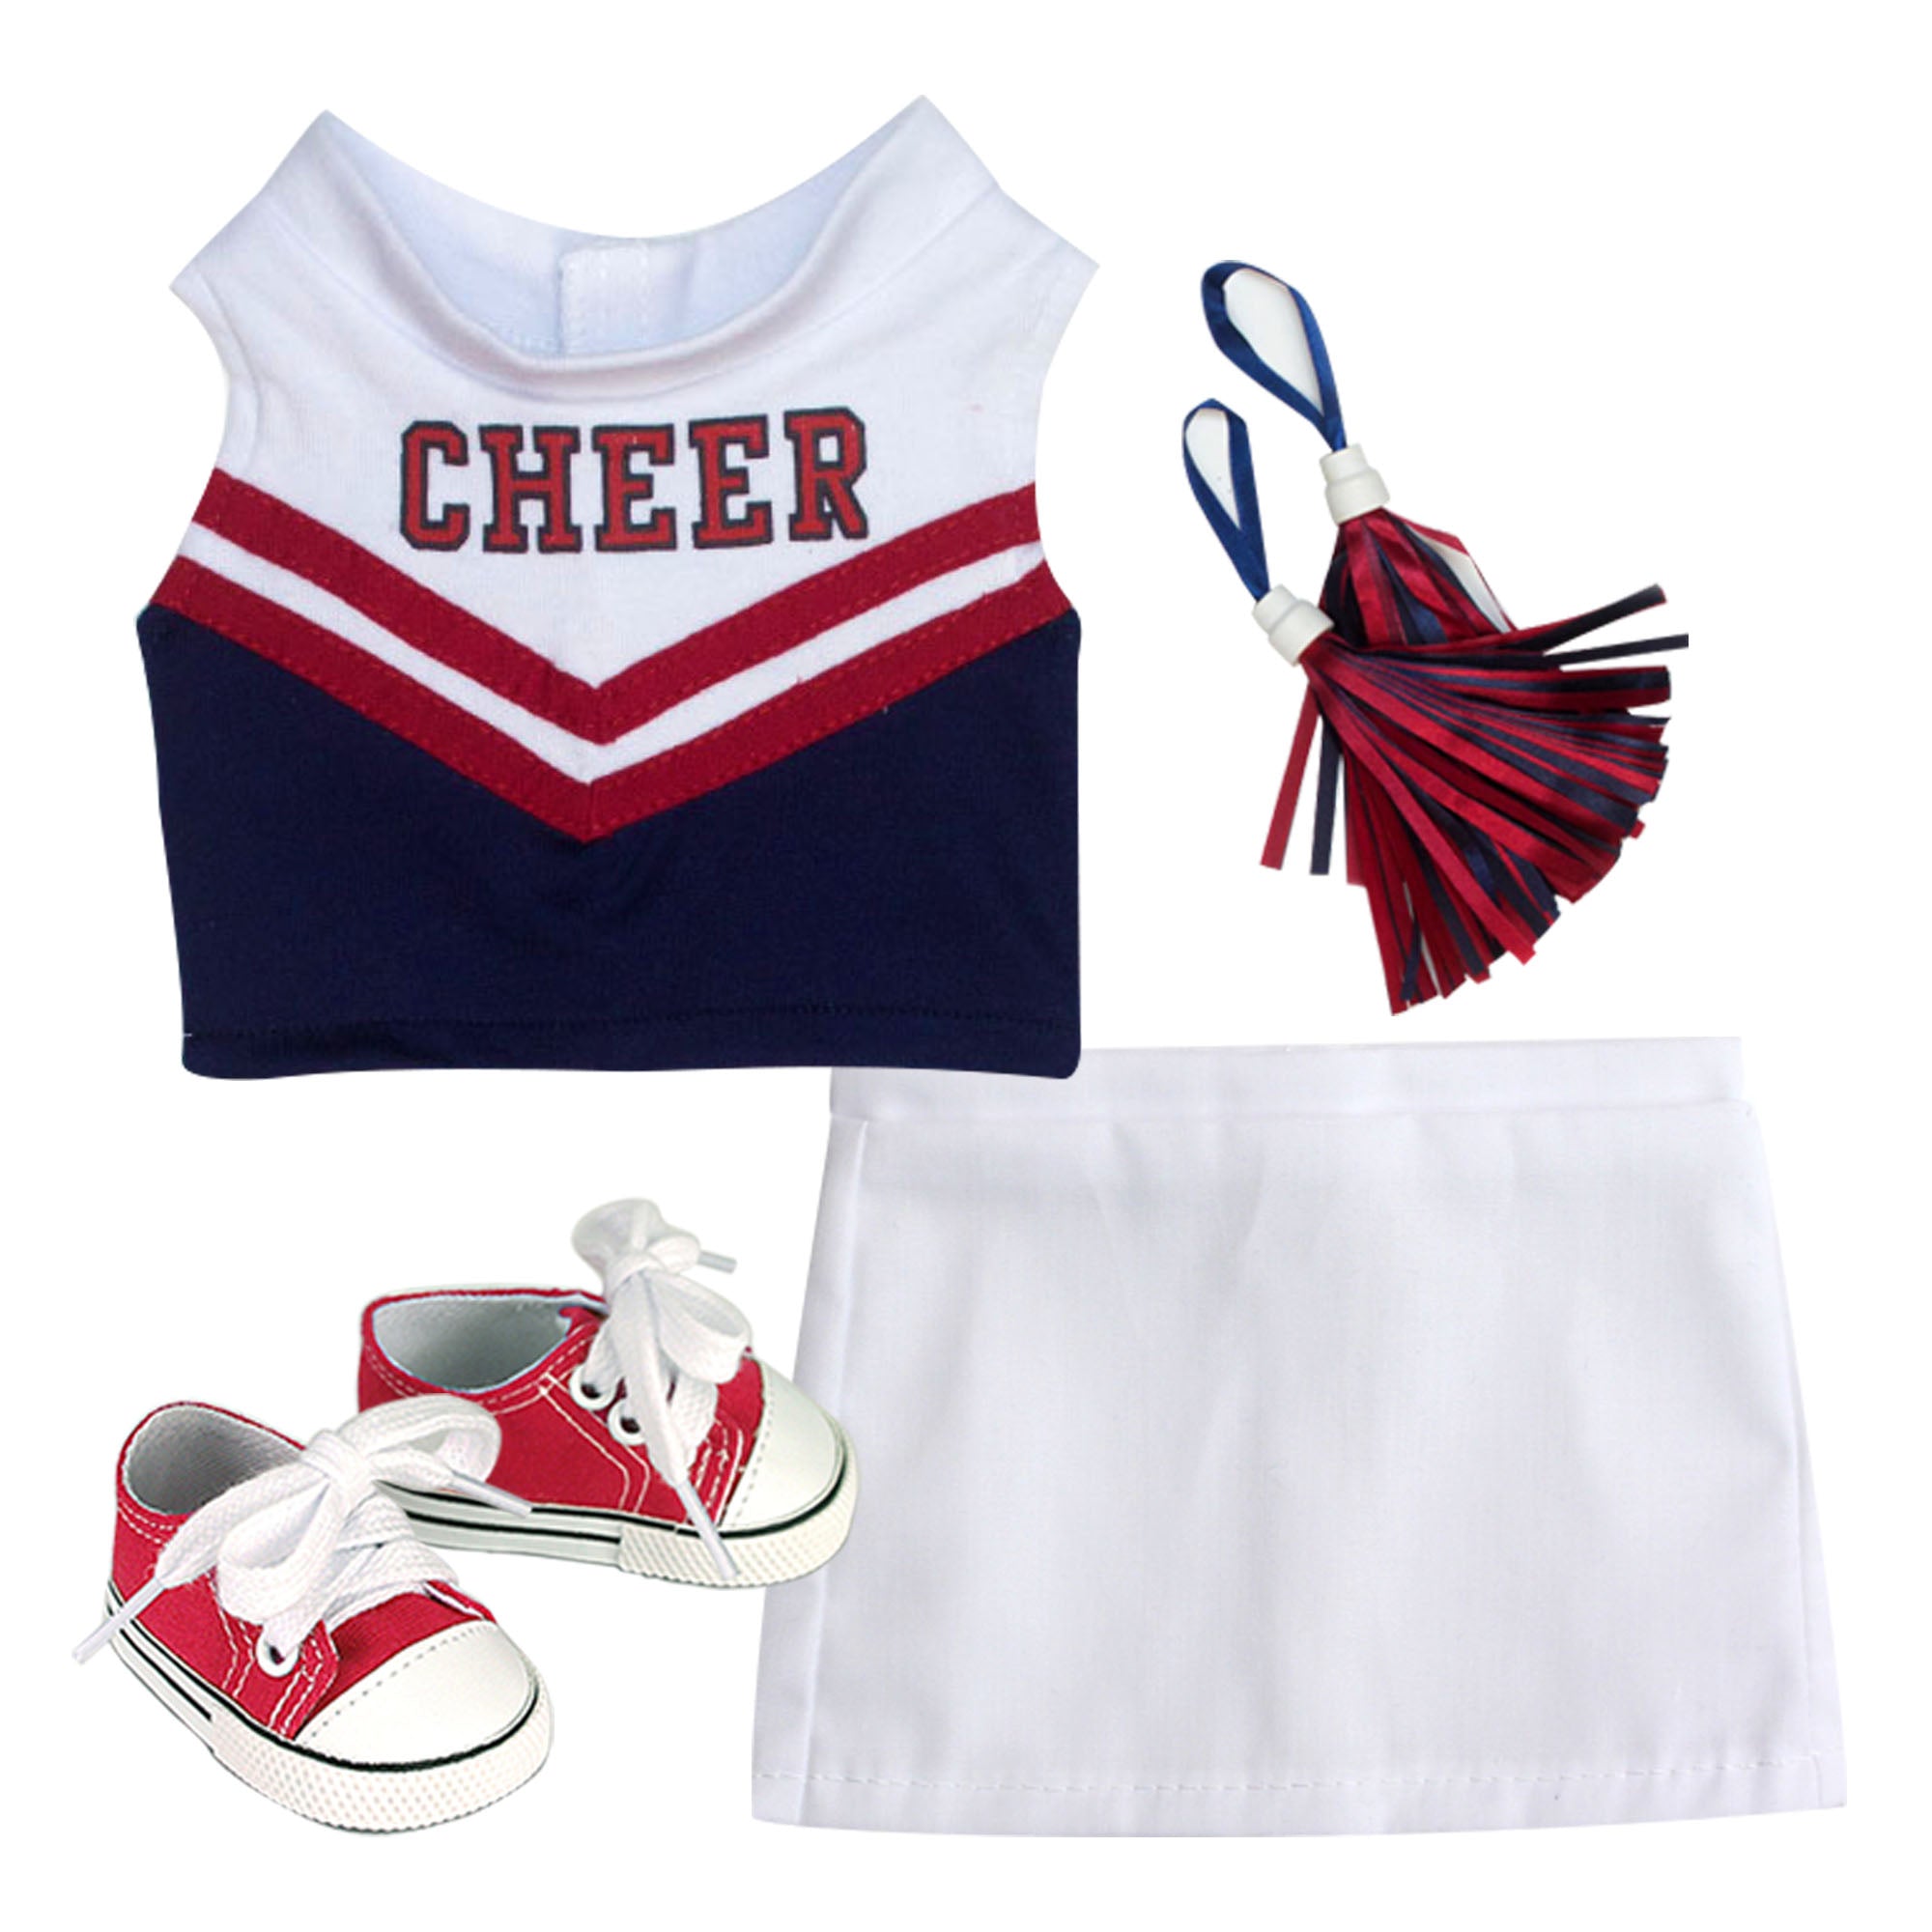 Sophia's 4 Piece Cheerleading Uniform with Pom Poms and Tennis Shoes for 18" Dolls, White/Red